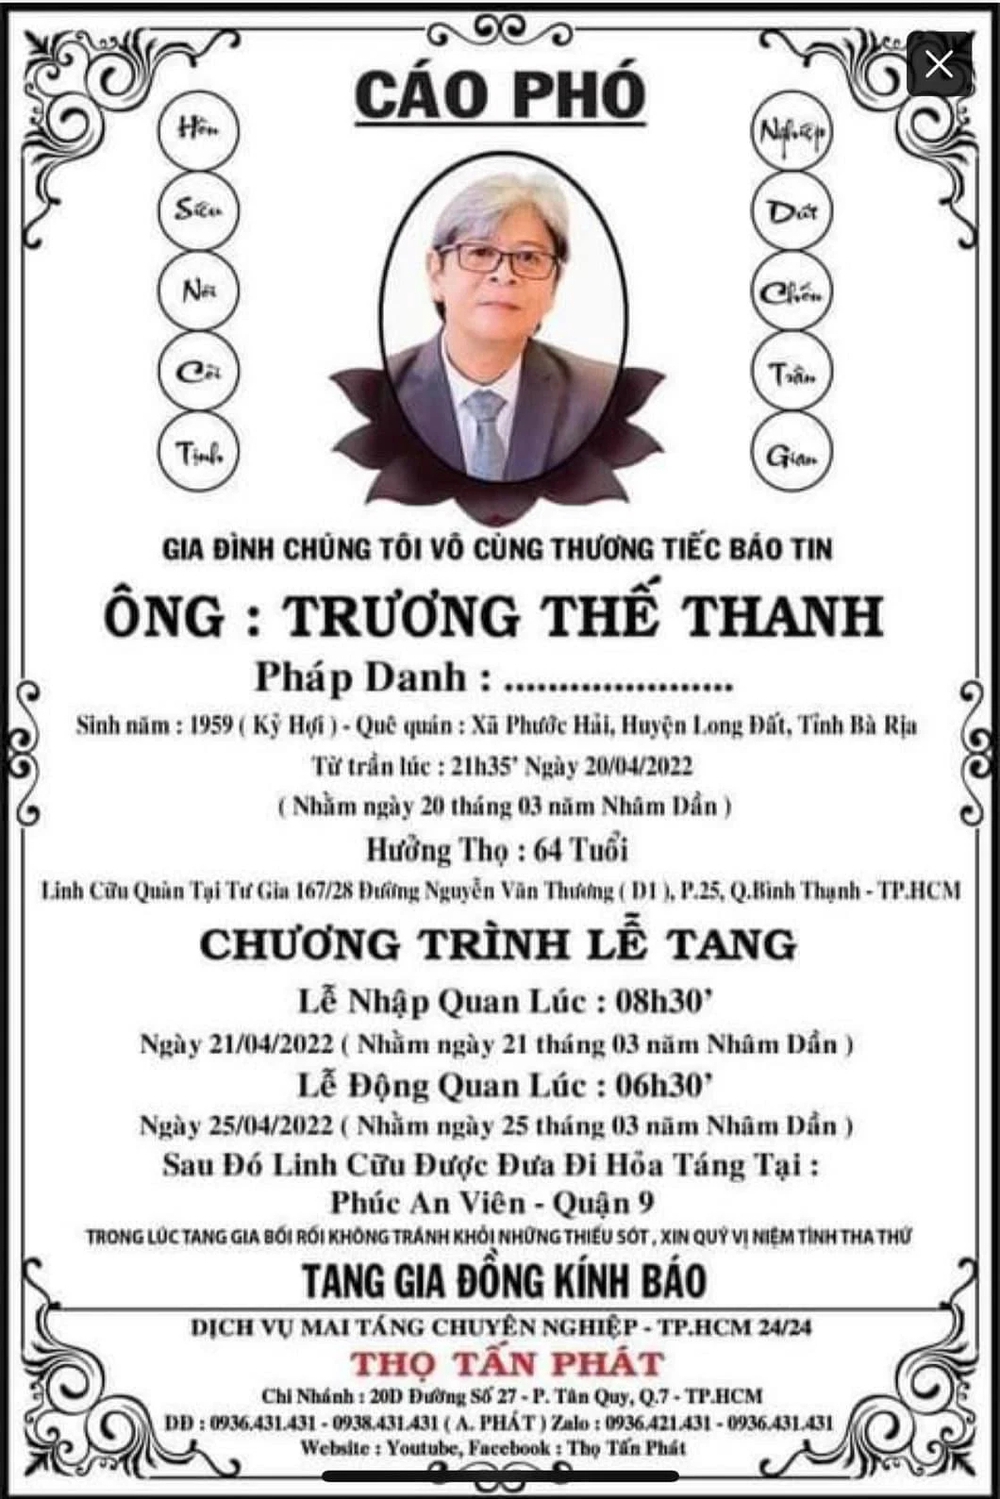 Artist The Thanh, who specializes in voicing Au Duong Chan Hoa, has died - Photo 4.